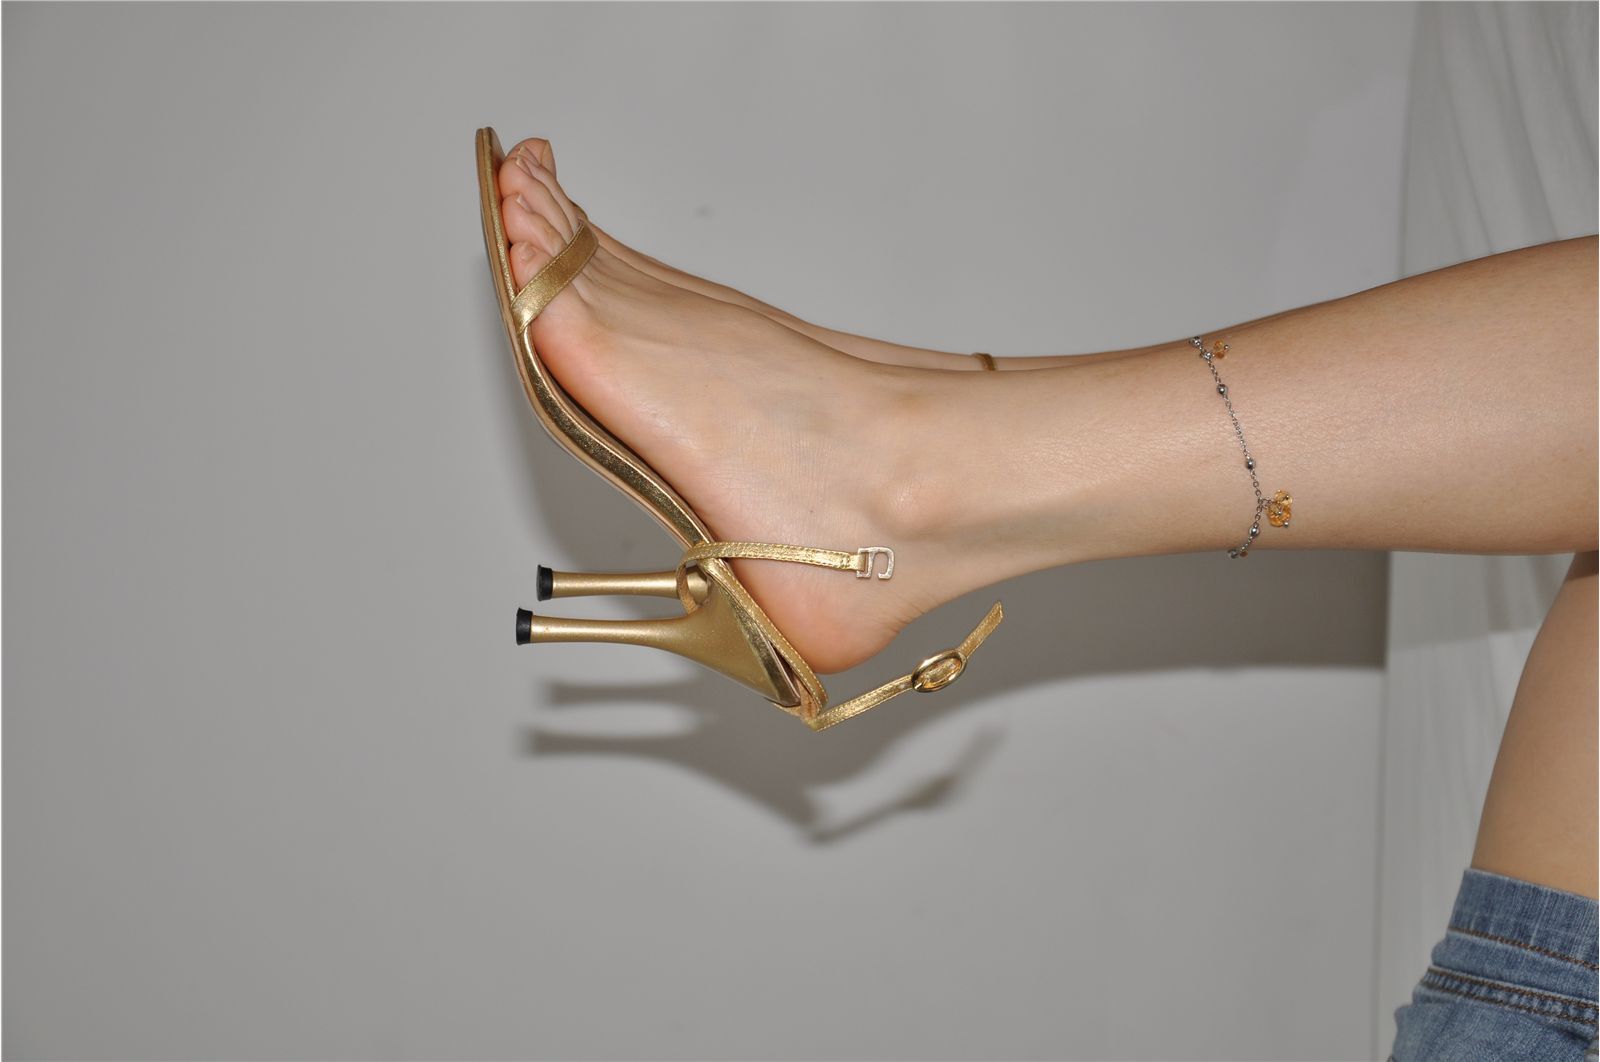 Choice of delicate women charm of beautiful ankles (Golden Melody)